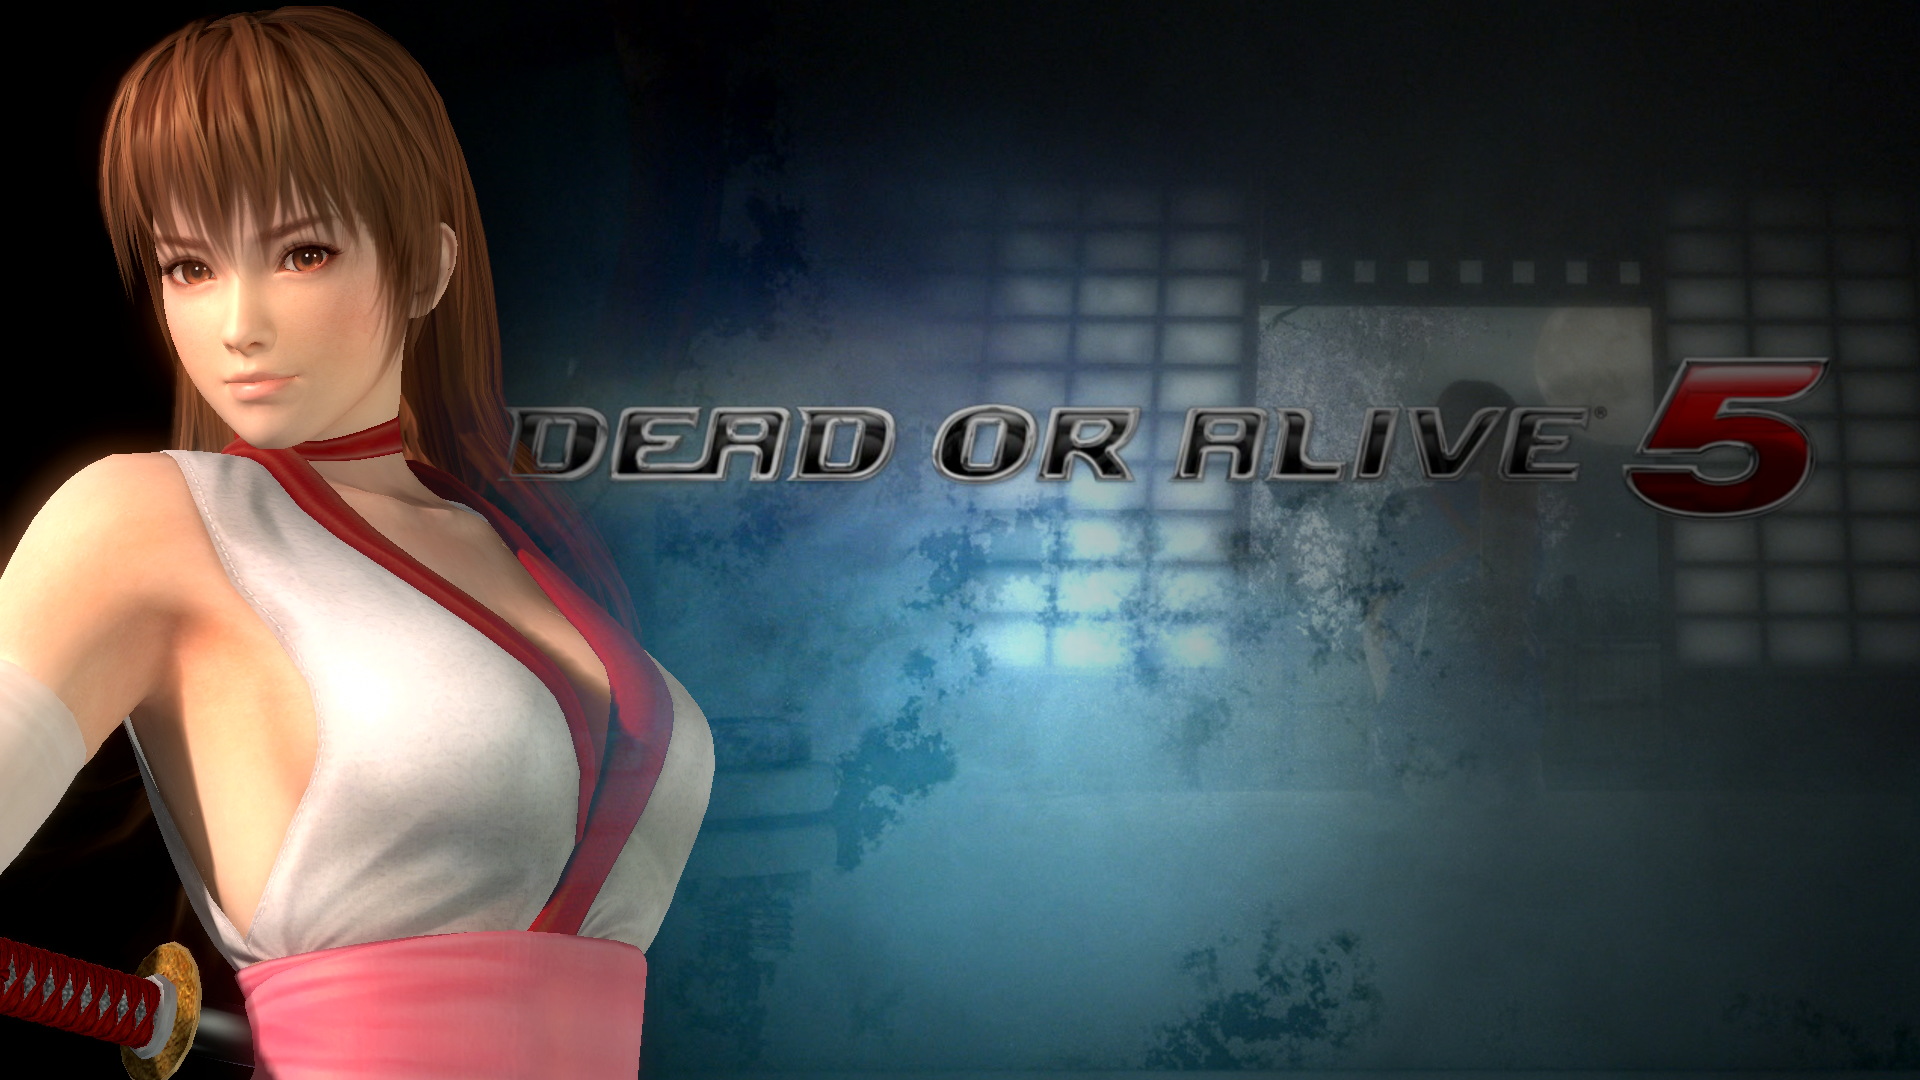 Dog or alive демо. Dead or Alive сейчас. Dead or Alive 5. Doa: Dead or Alive Джейми.